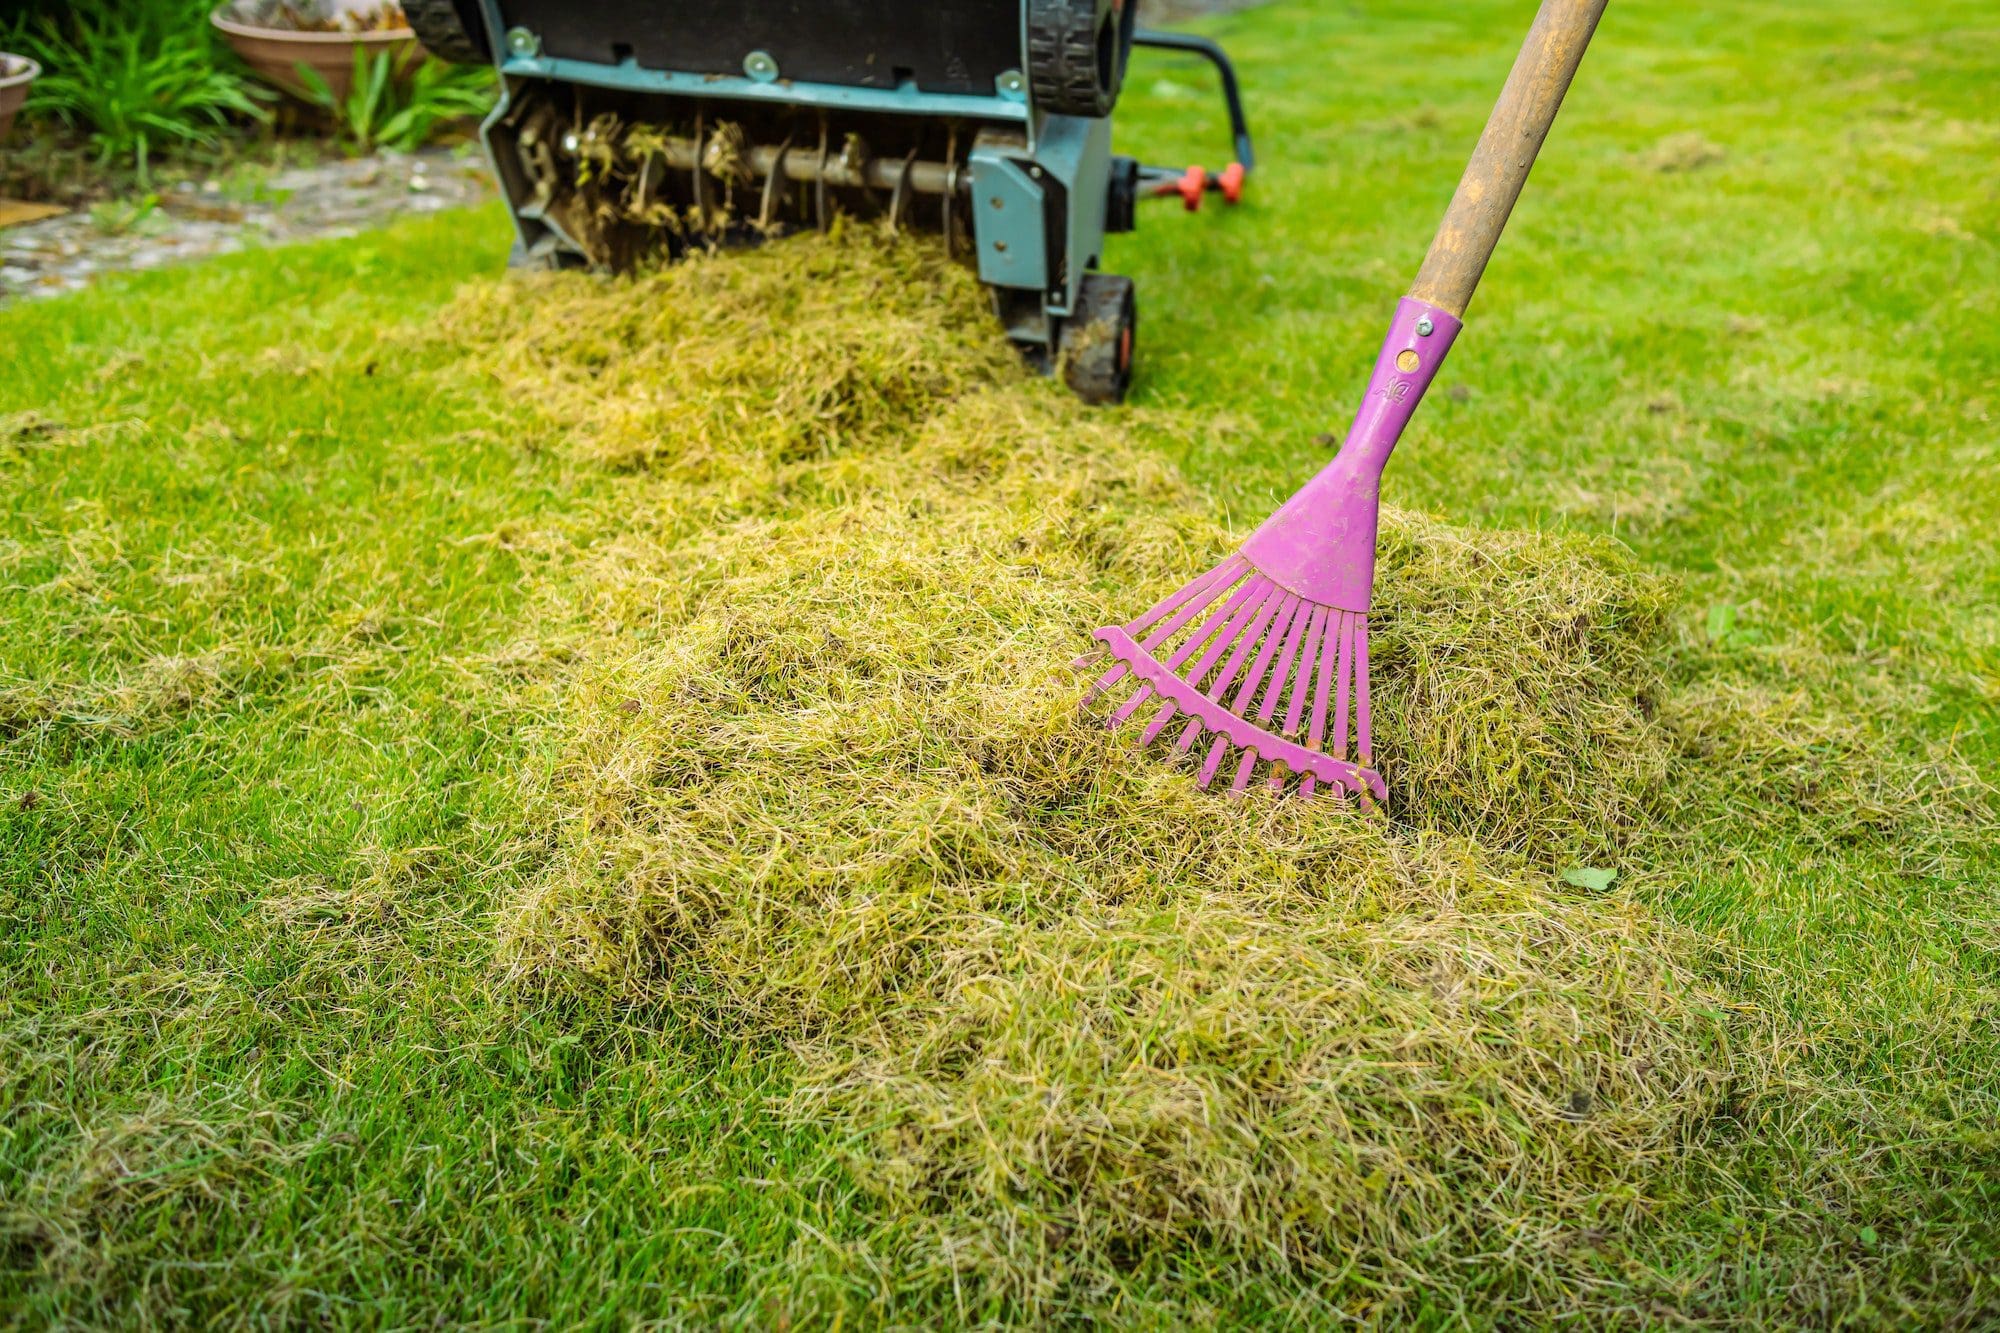 Lawn care - verticut, thatch the grass, aerating and scarifying the lawn in the garden